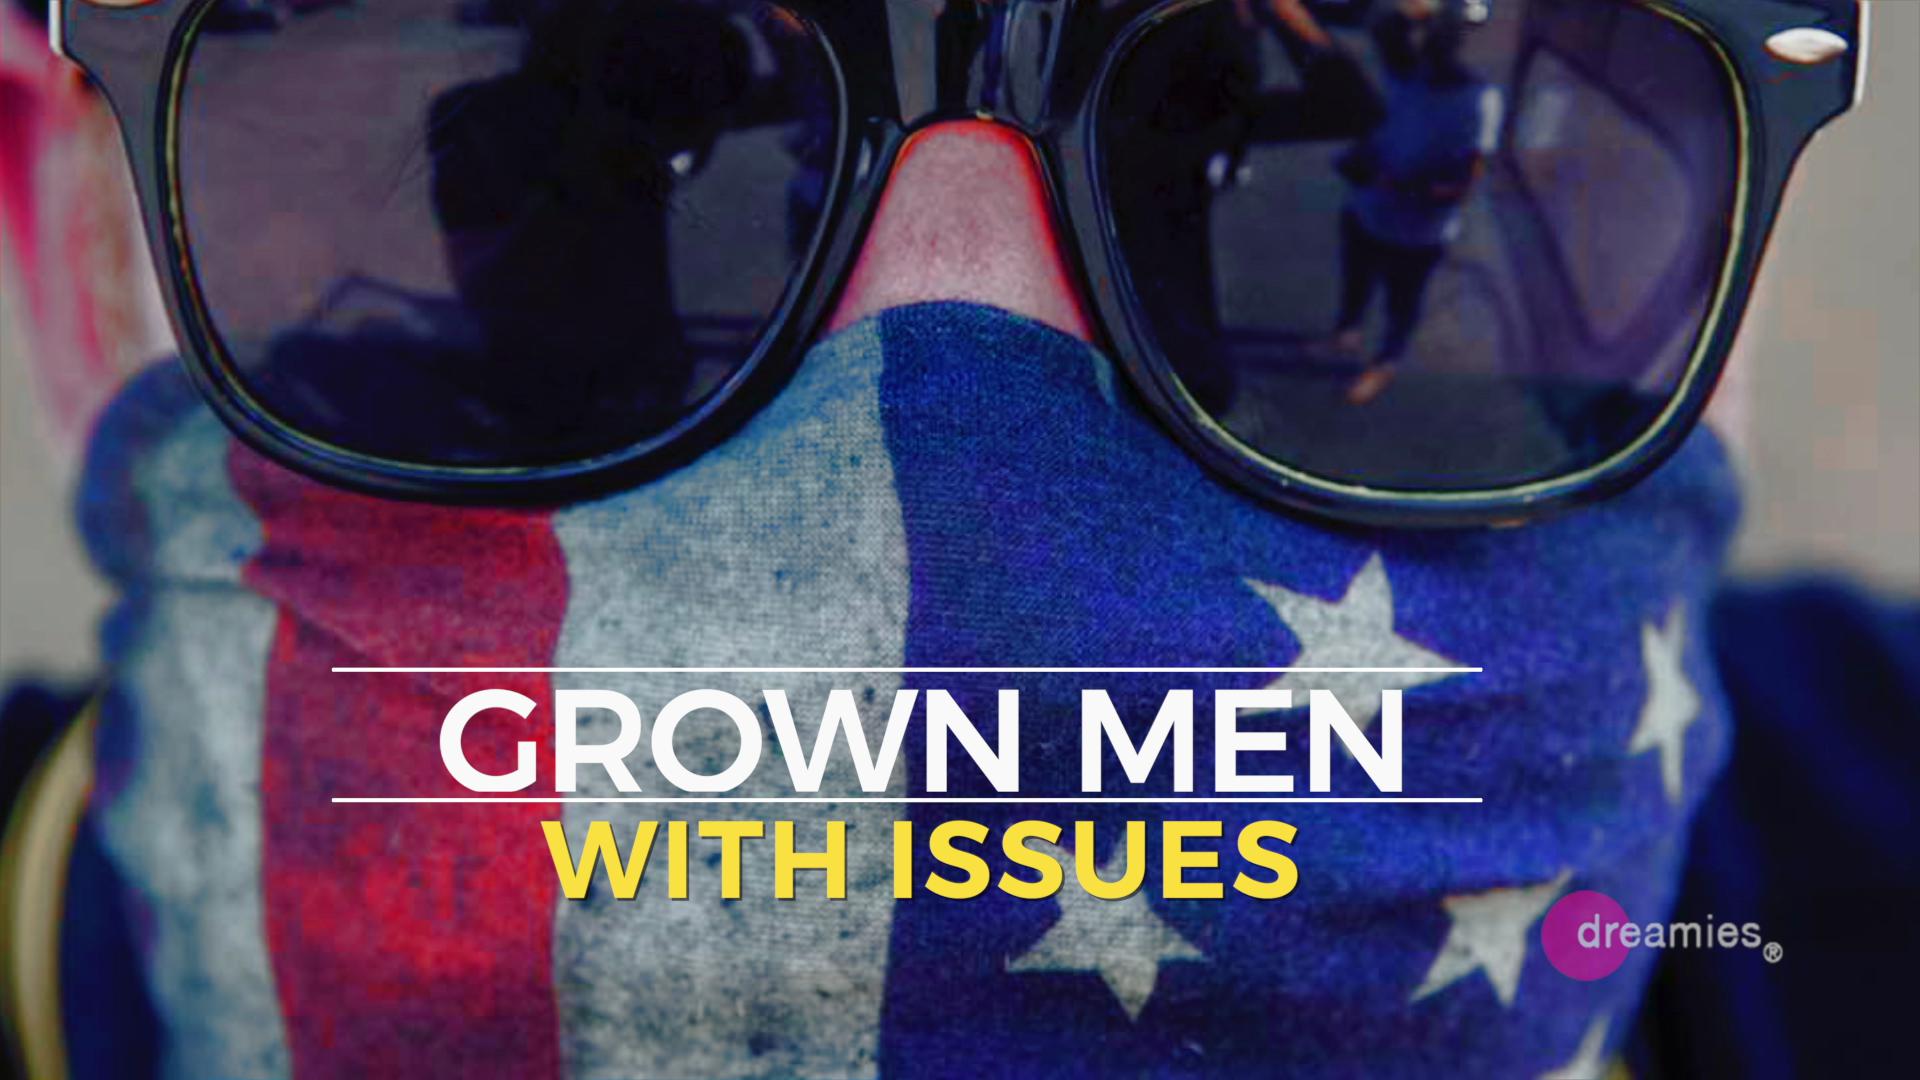 GrownMenWithIssues